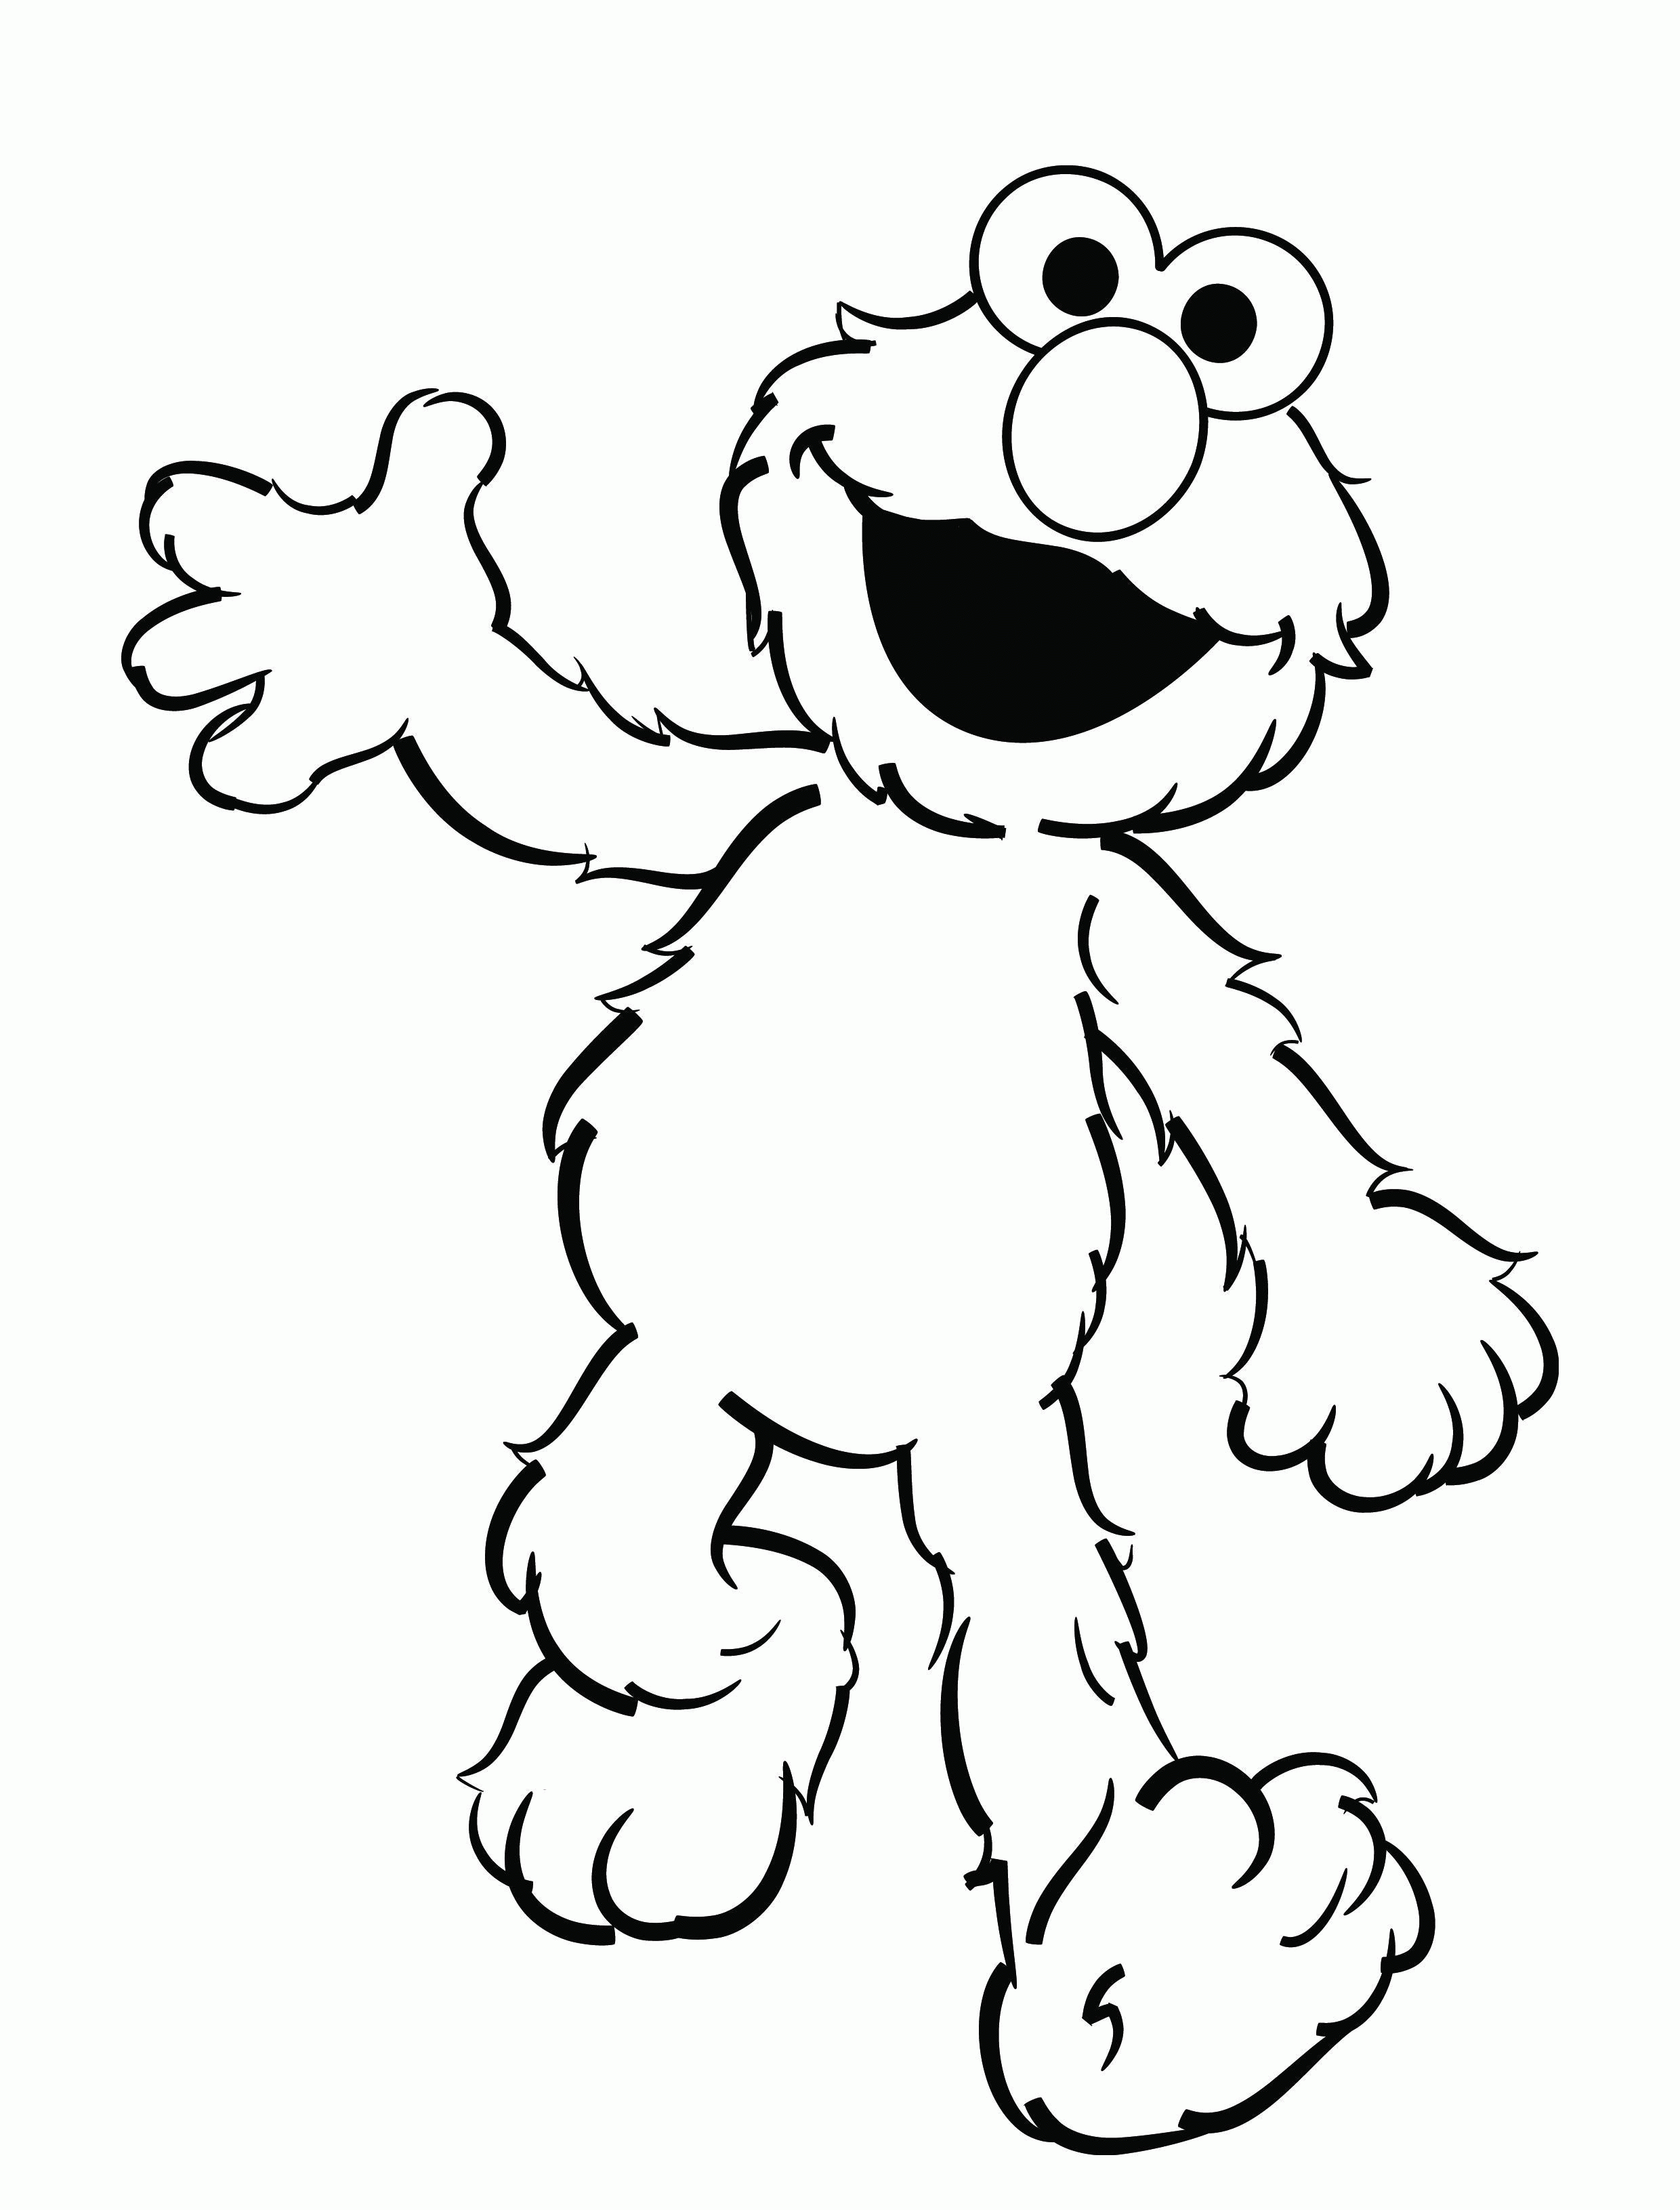 sesame street coloring page for free sesame street zoe coloring ...